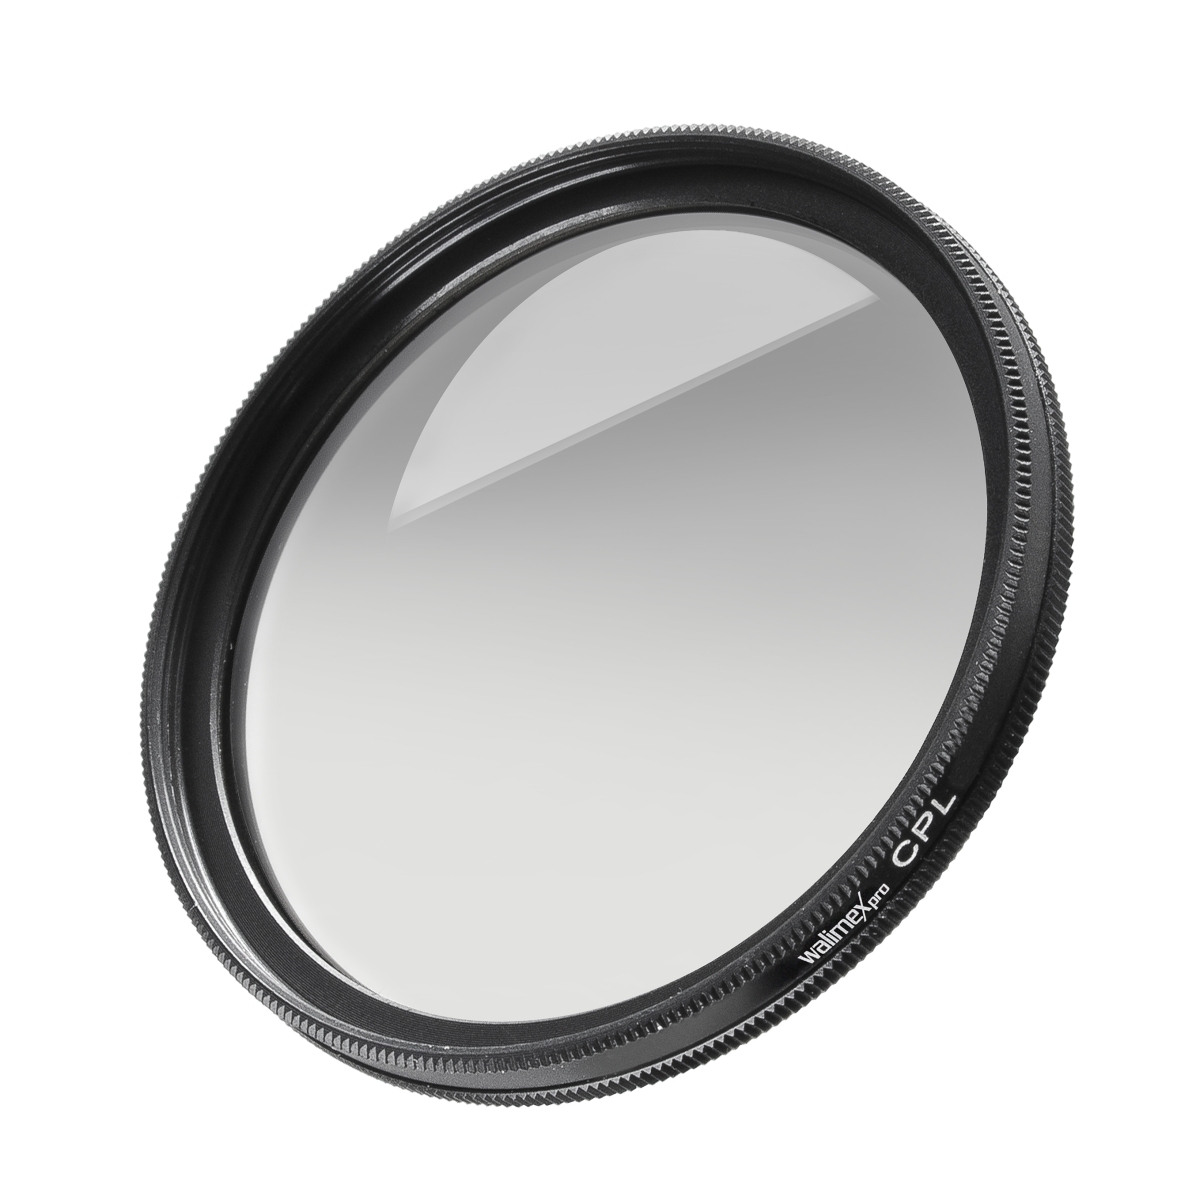 Walimex pro MC CPL filter coated 77 mm